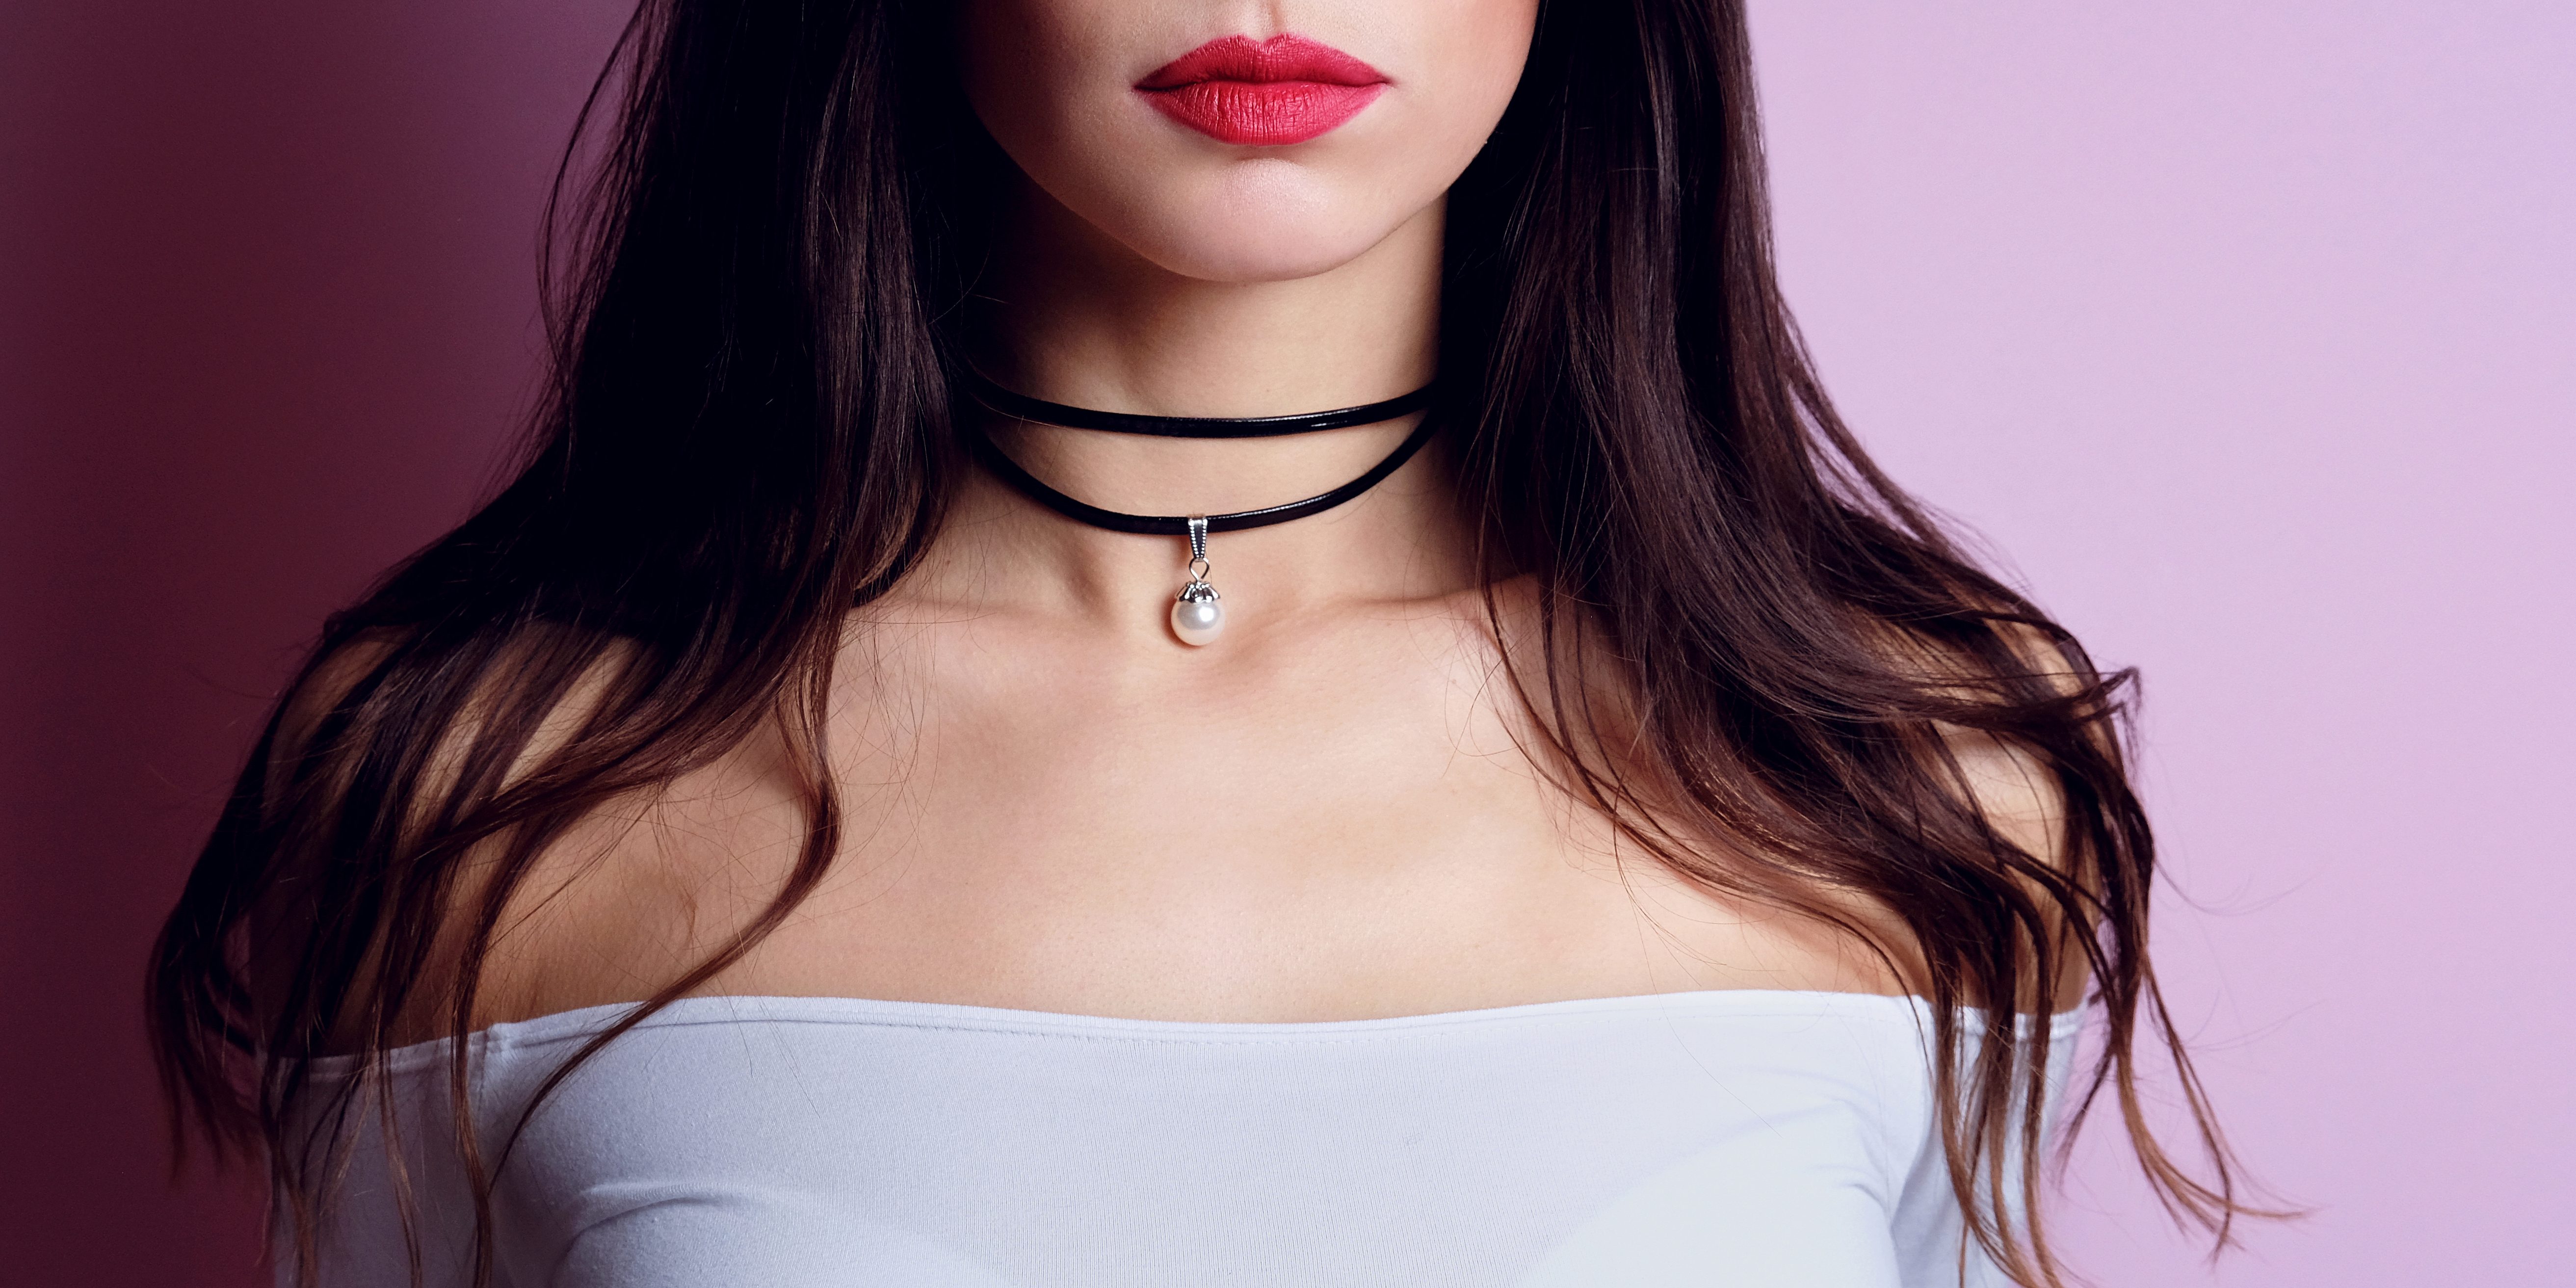 Who remembers these tattoo choker necklaces? So popular in the 90's :  r/nostalgia